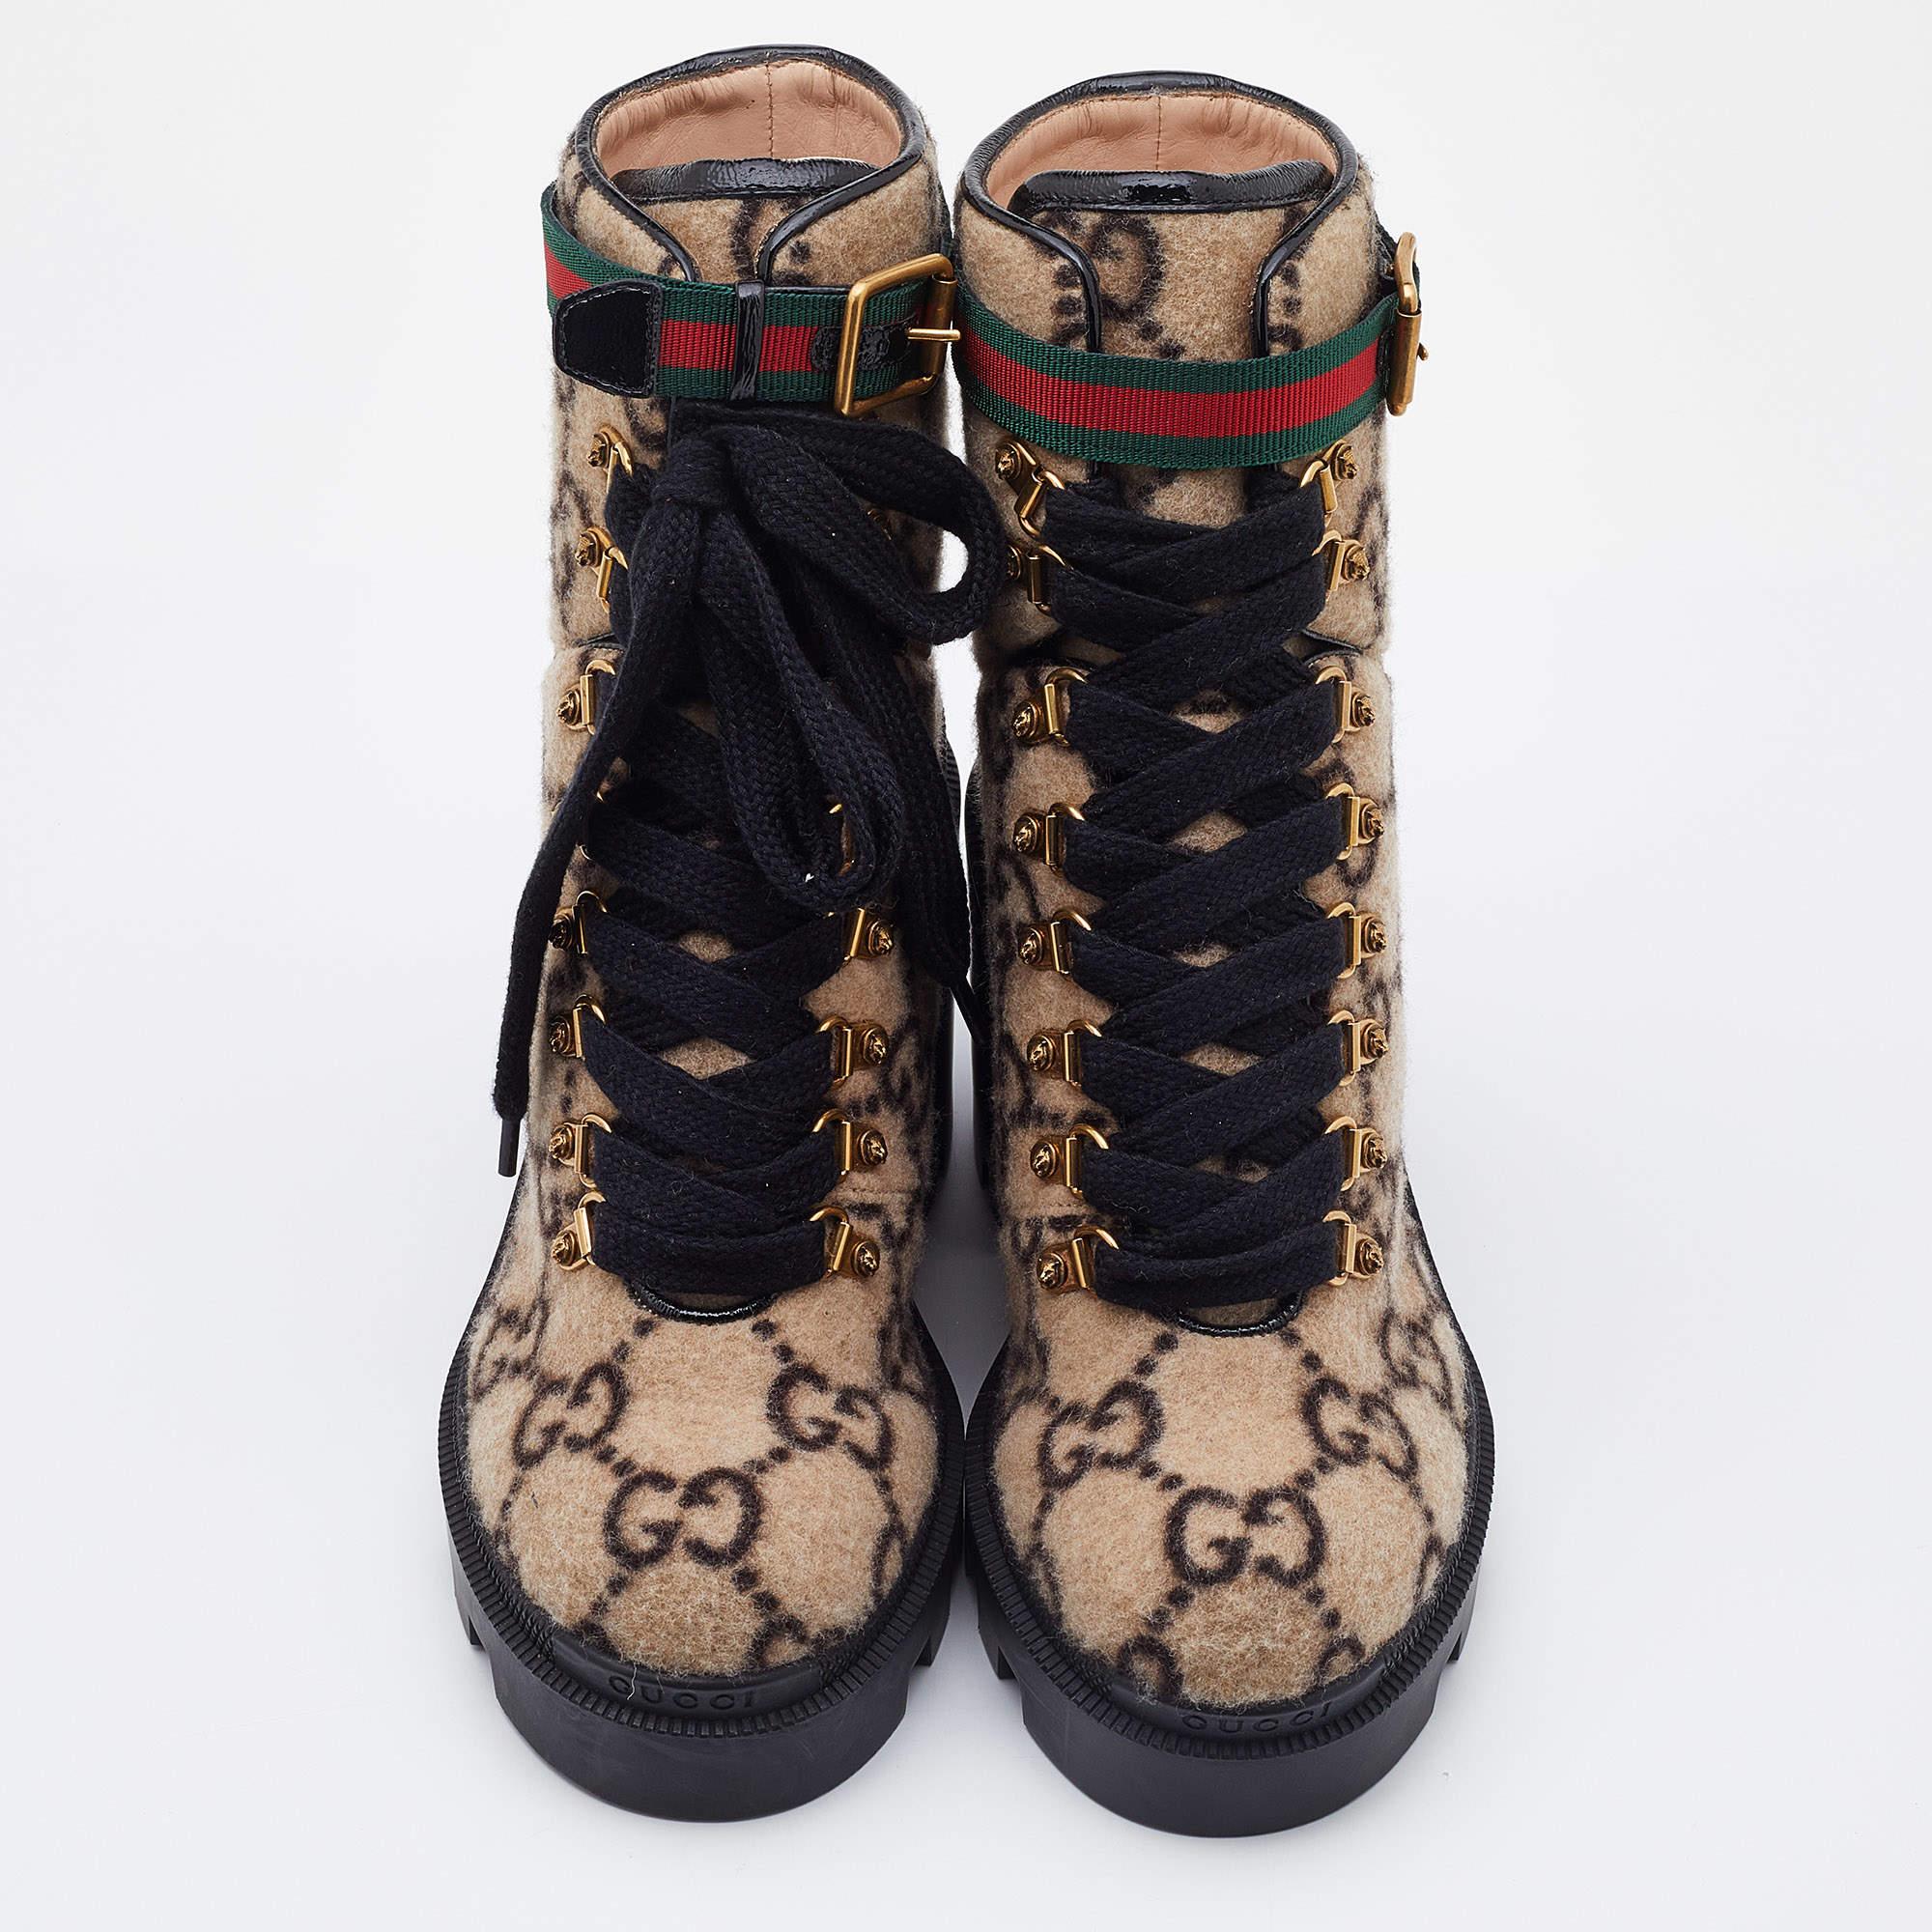 Gucci's love for creating statement-making designs is beautifully displayed on this pair! Constructed using GG wool, the boots are secured with black laces, lined with leather, and elevated by chunky block heels. A Web belt strap seals the look of